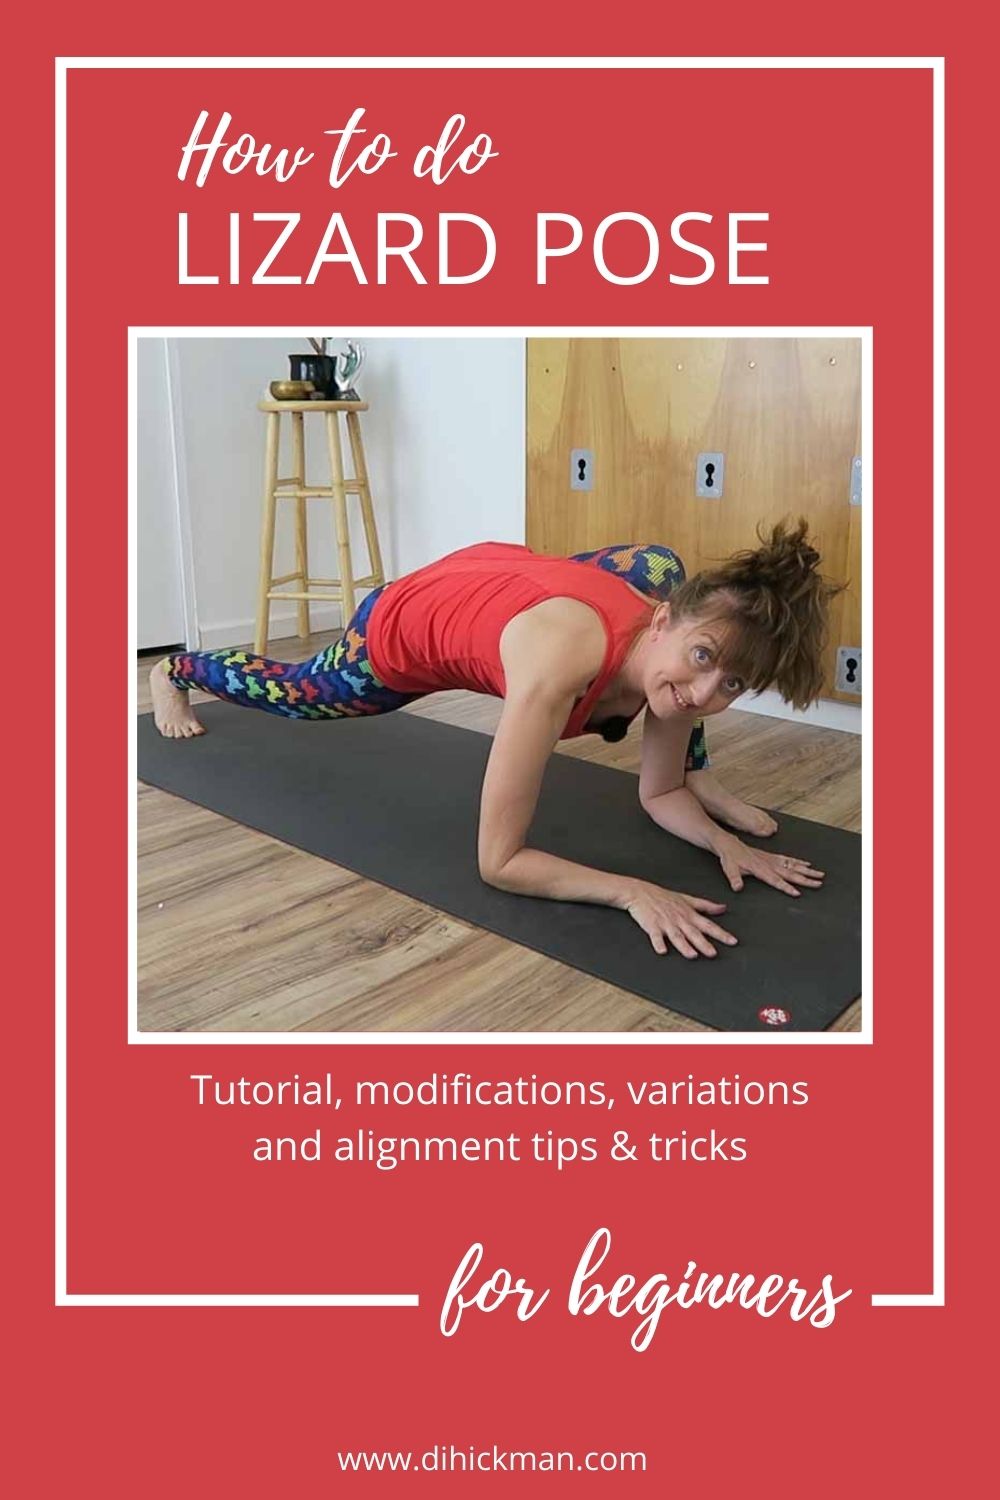 How to do Lizard pose for beginners